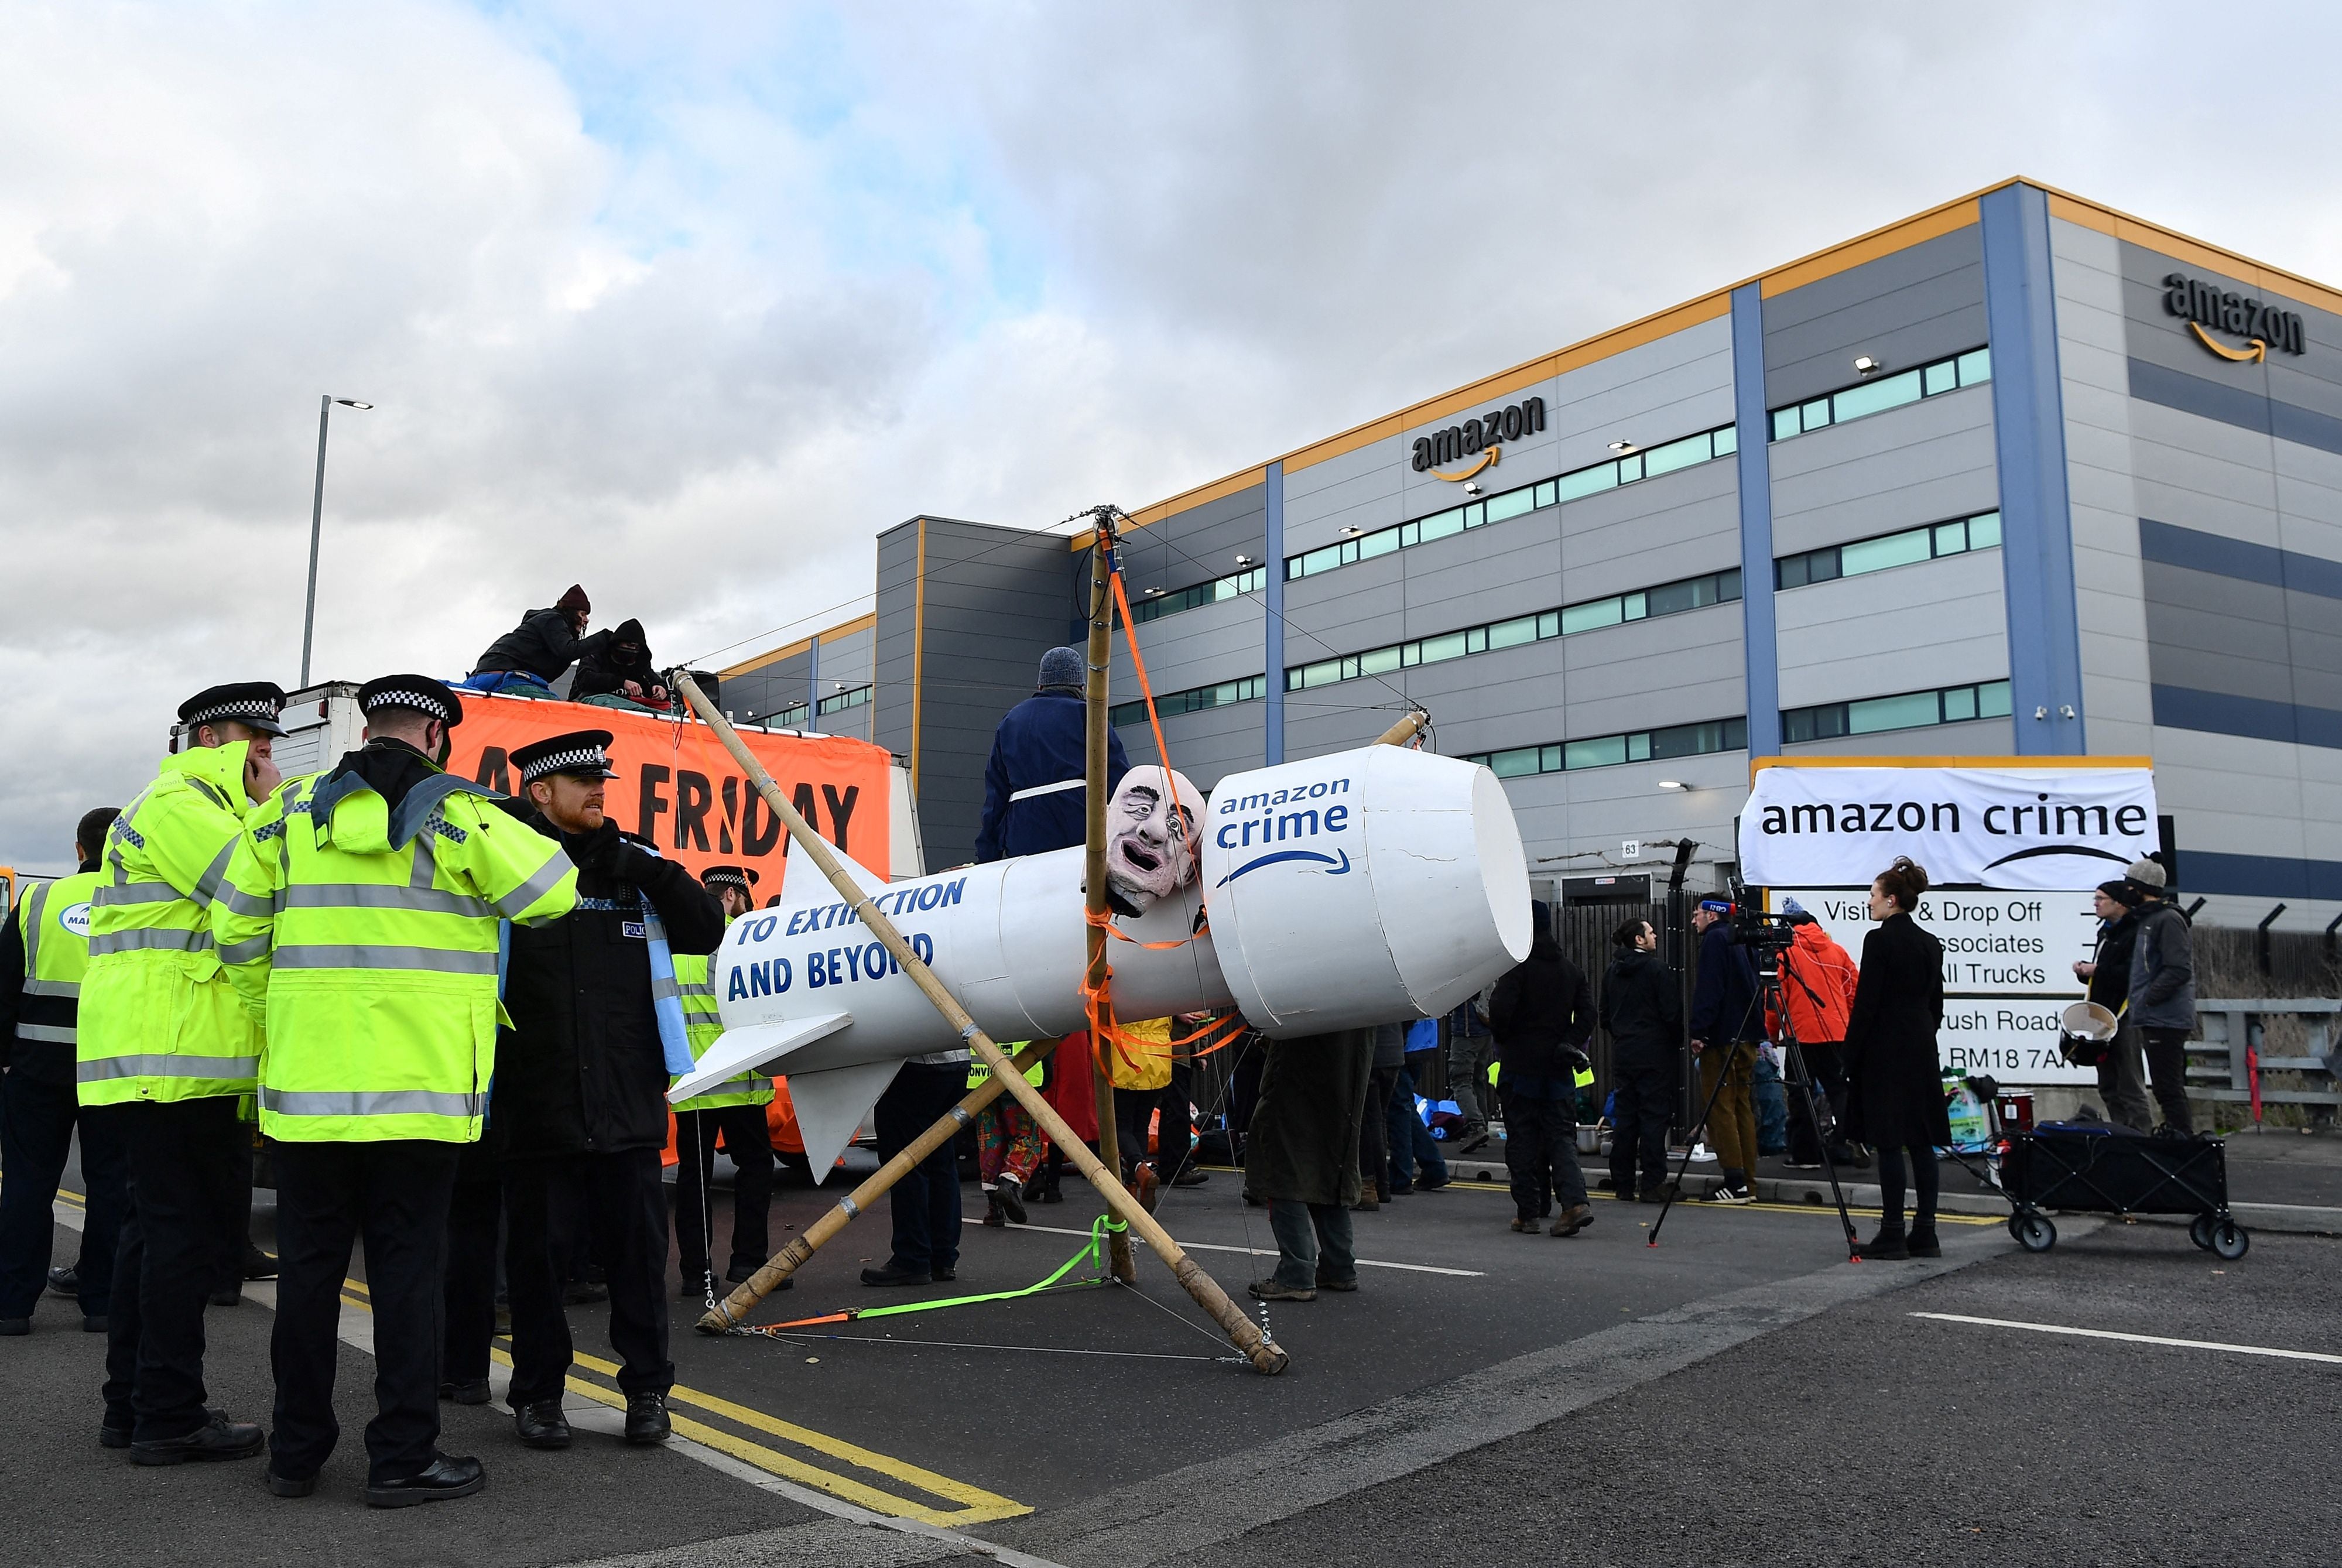 Police officers are pictured beside an Extinction Rebellion (XR) protest outside an Amazon warehouse in Tilbury, Essex, on 26 November, 2021.